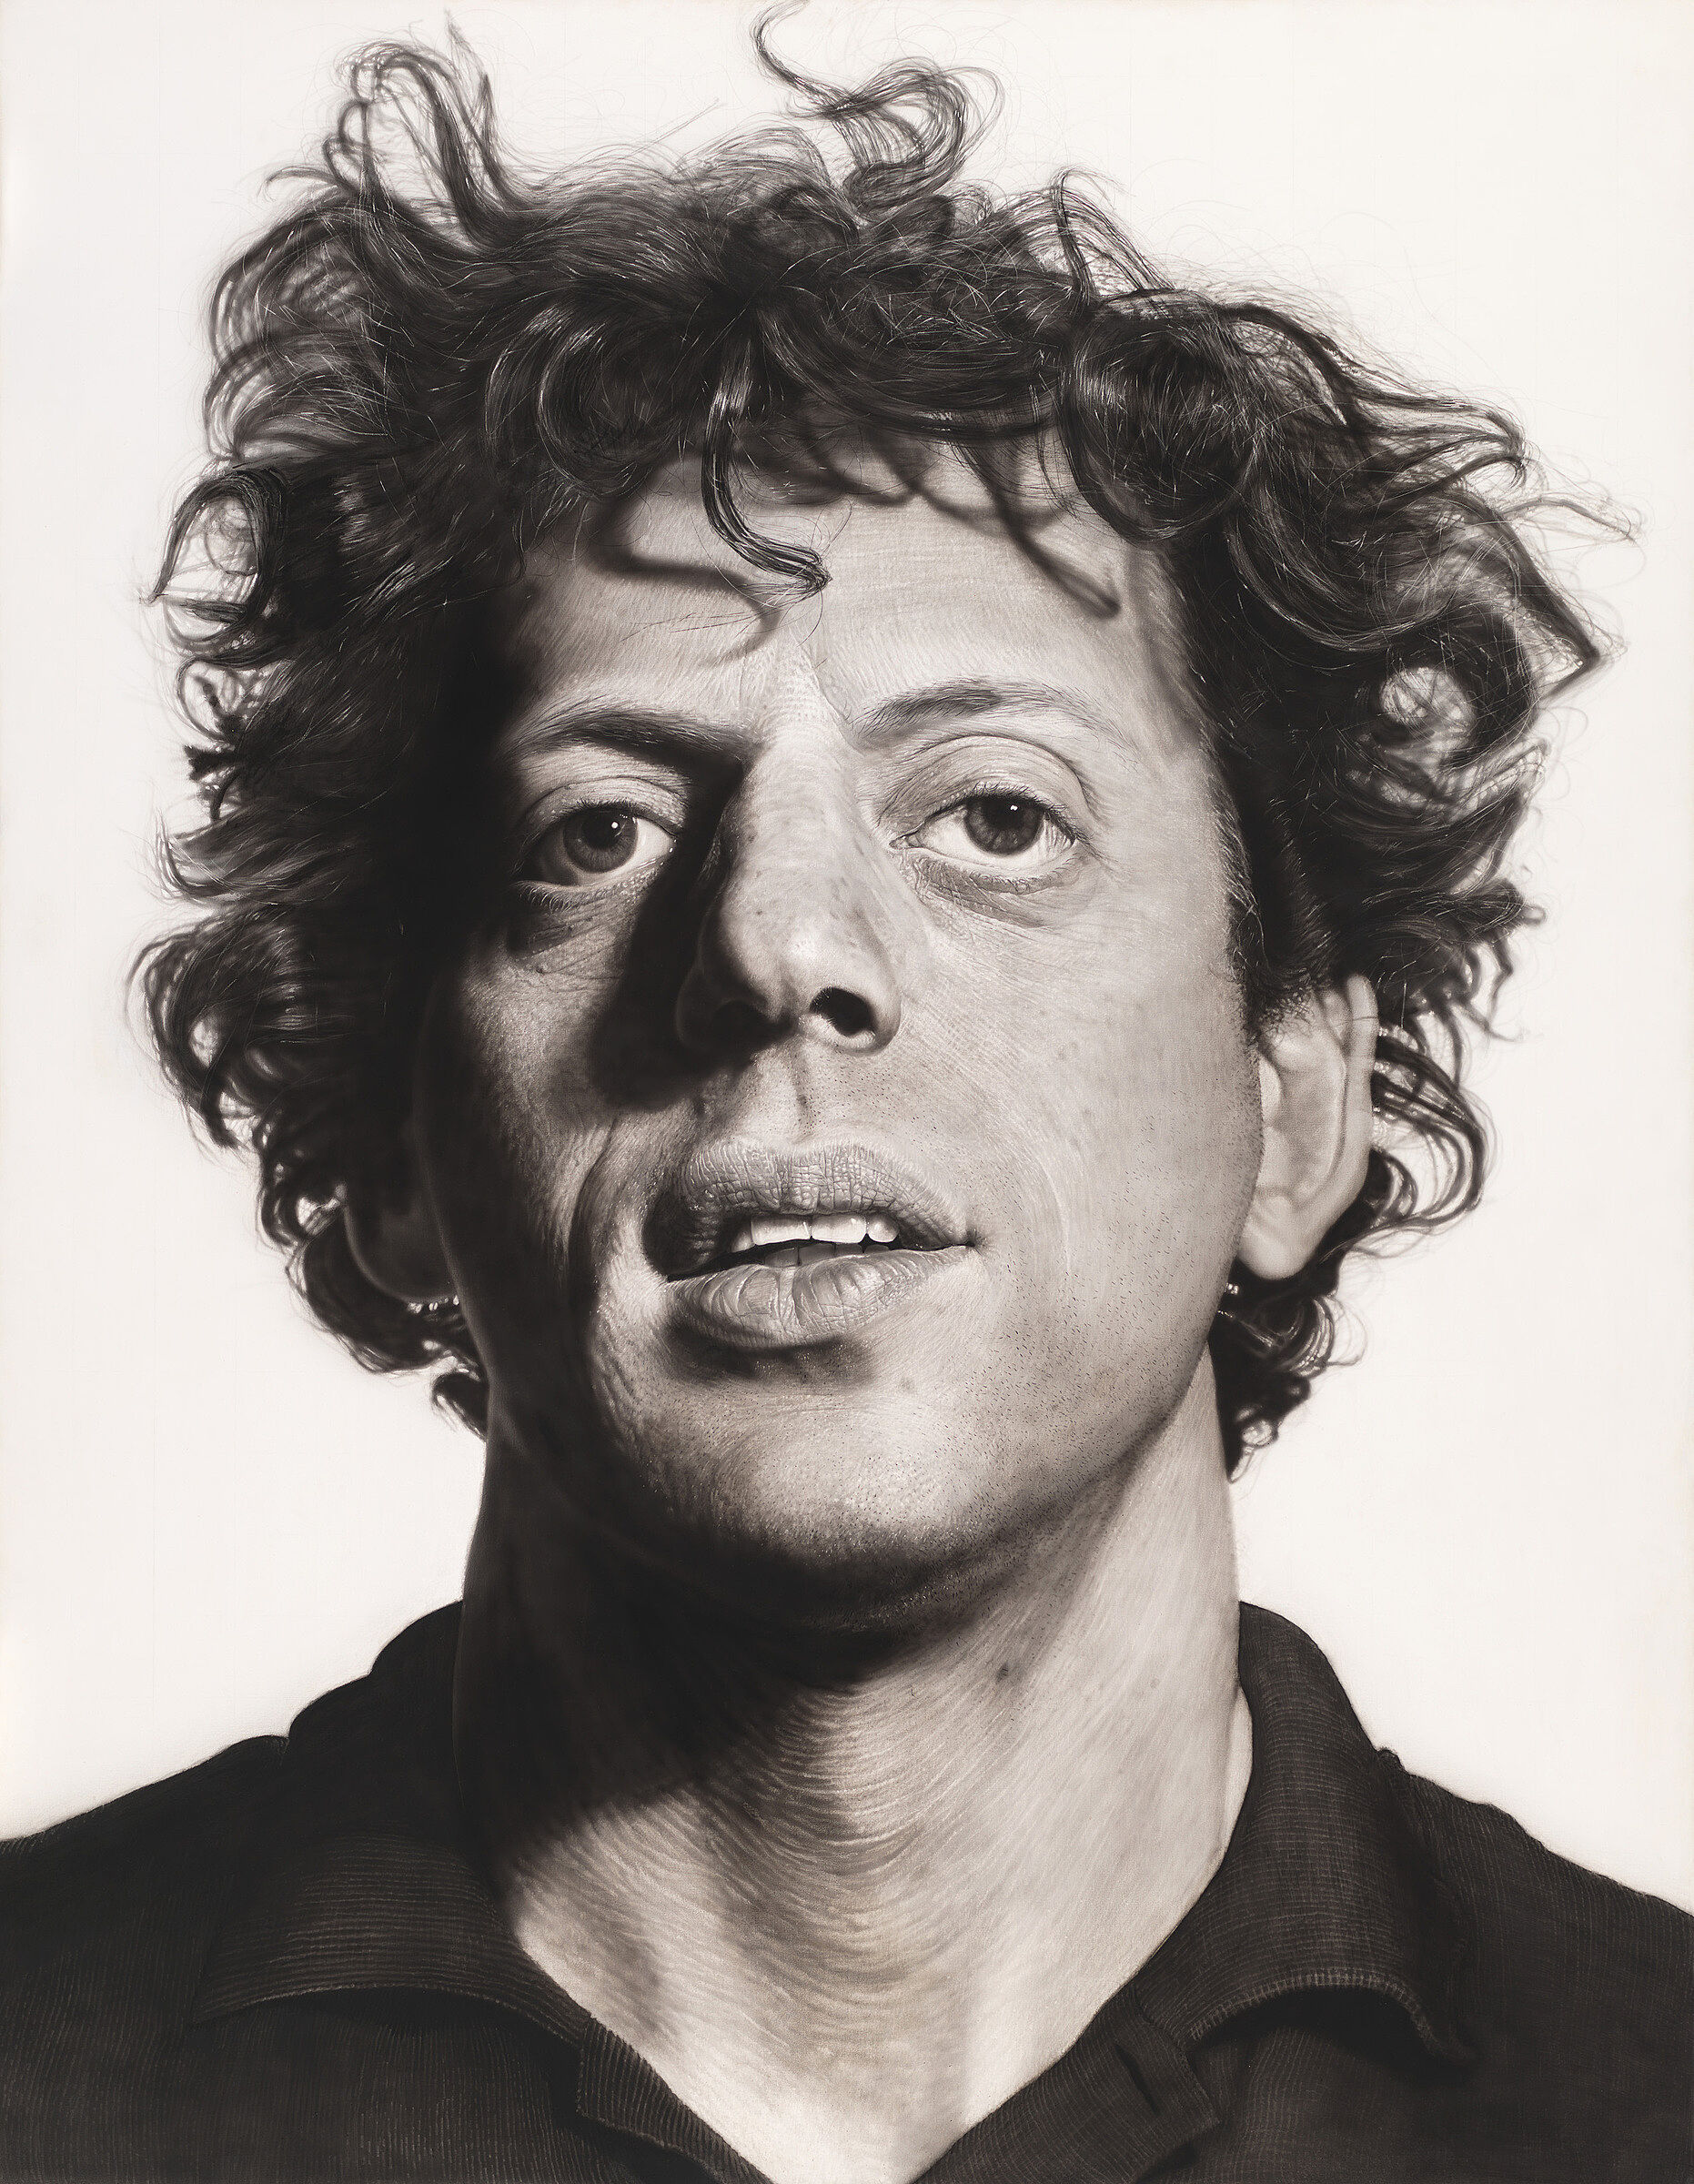 A portrait drawing of Philip Glass.